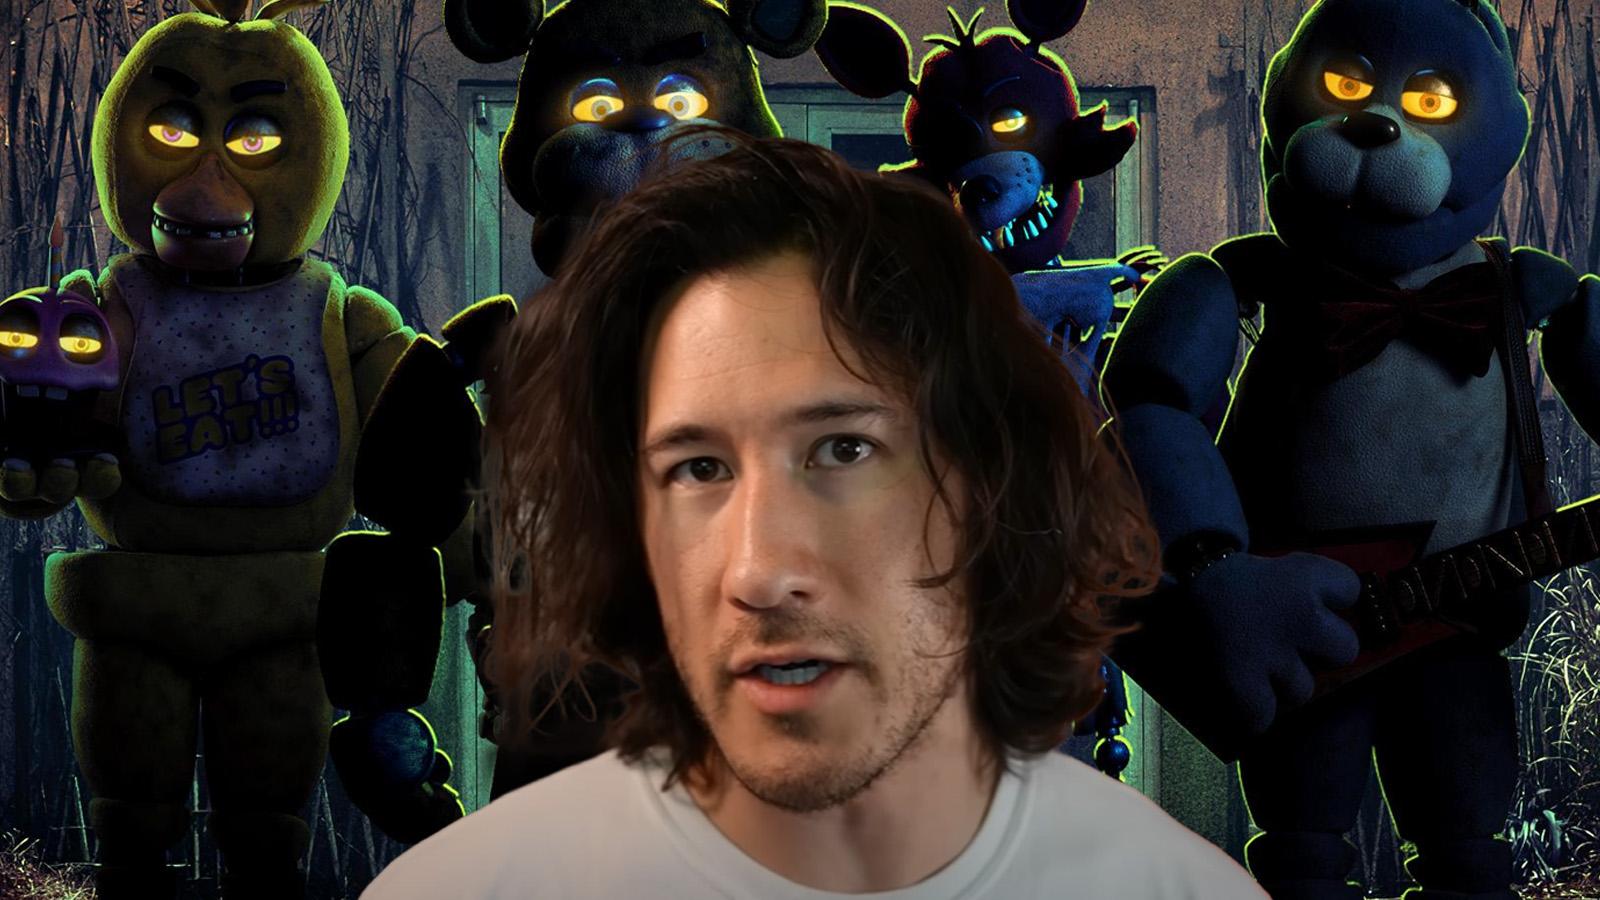 Markiplier in front of Five Nights at Freddy's gameplay